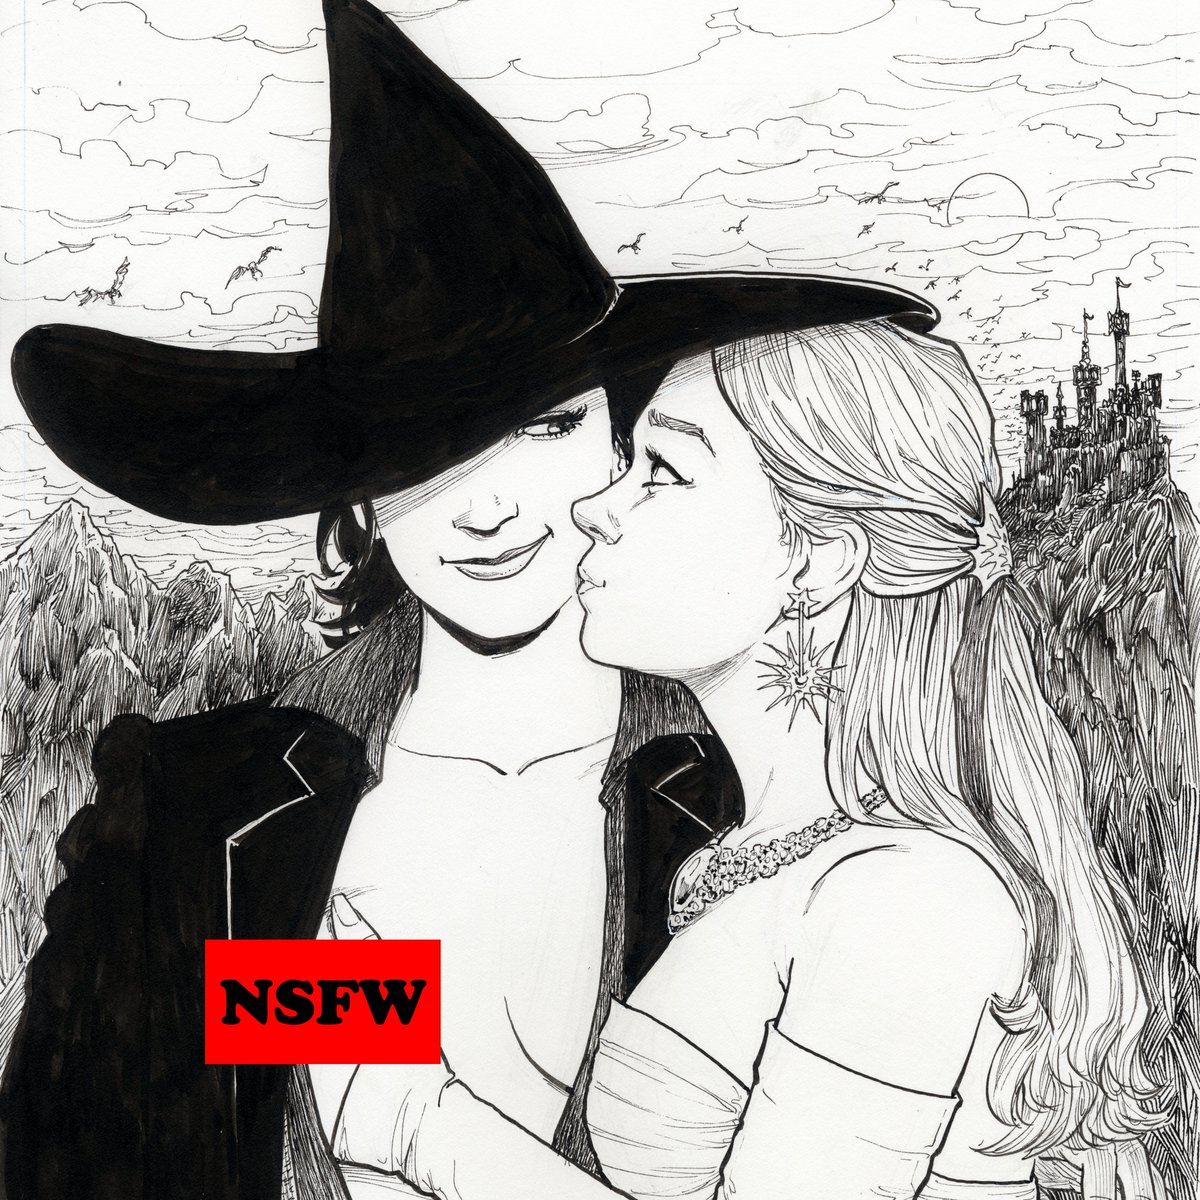 We're huge fans of @TerryMooreArt's signature Black-and-White style, so we knew we had to offer a B&W version of his cover 👏 kickstarter.com/projects/comic…